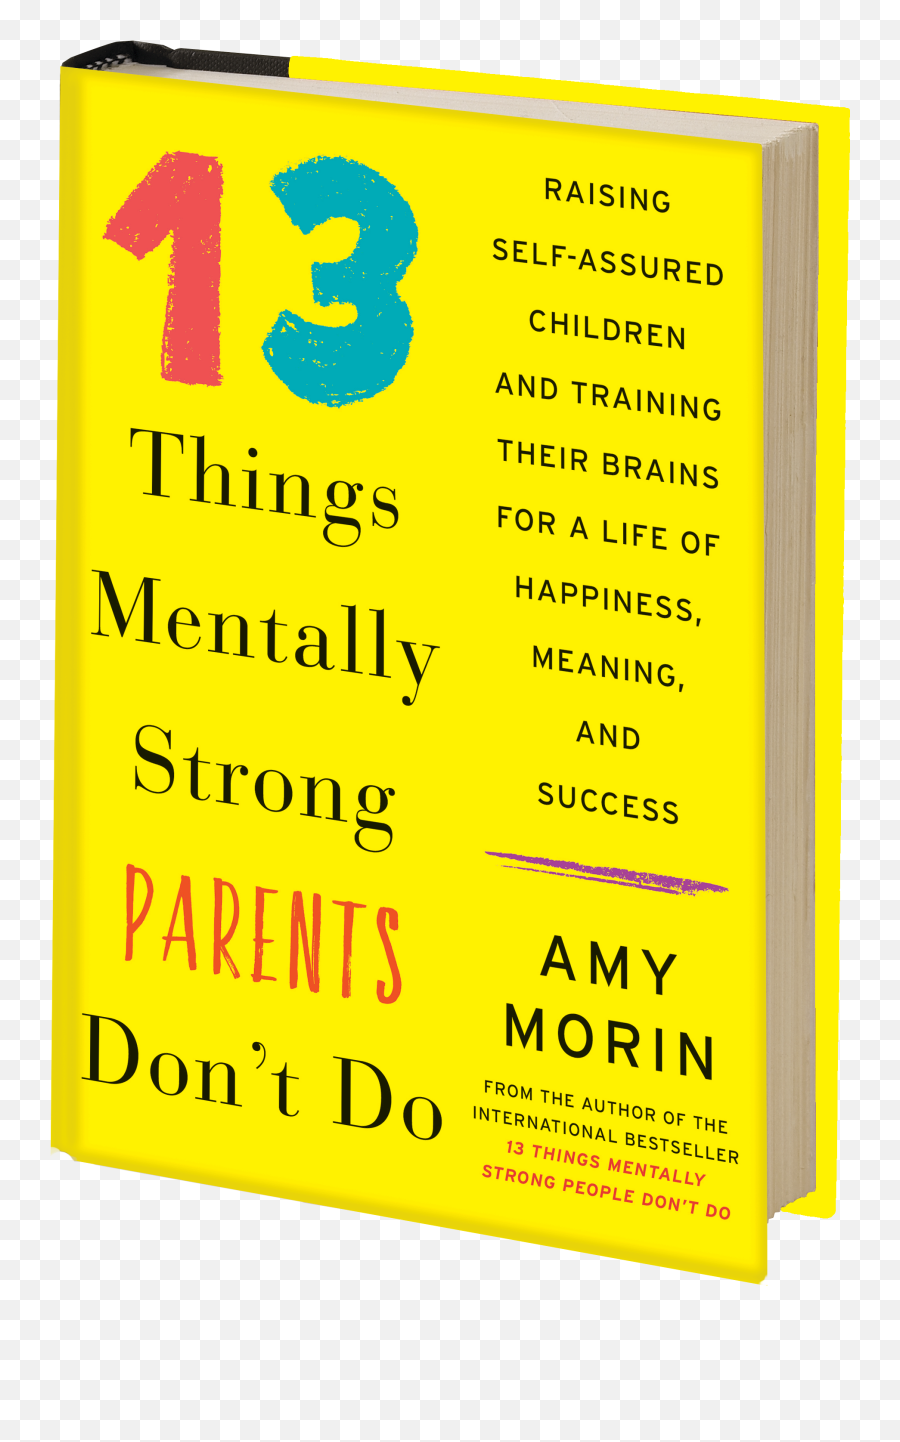 How To Raise Mentally Strong Kids In Todayu0027s World - Horizontal Emoji,Train Your Mind To Be Stronger Than Your Emotions